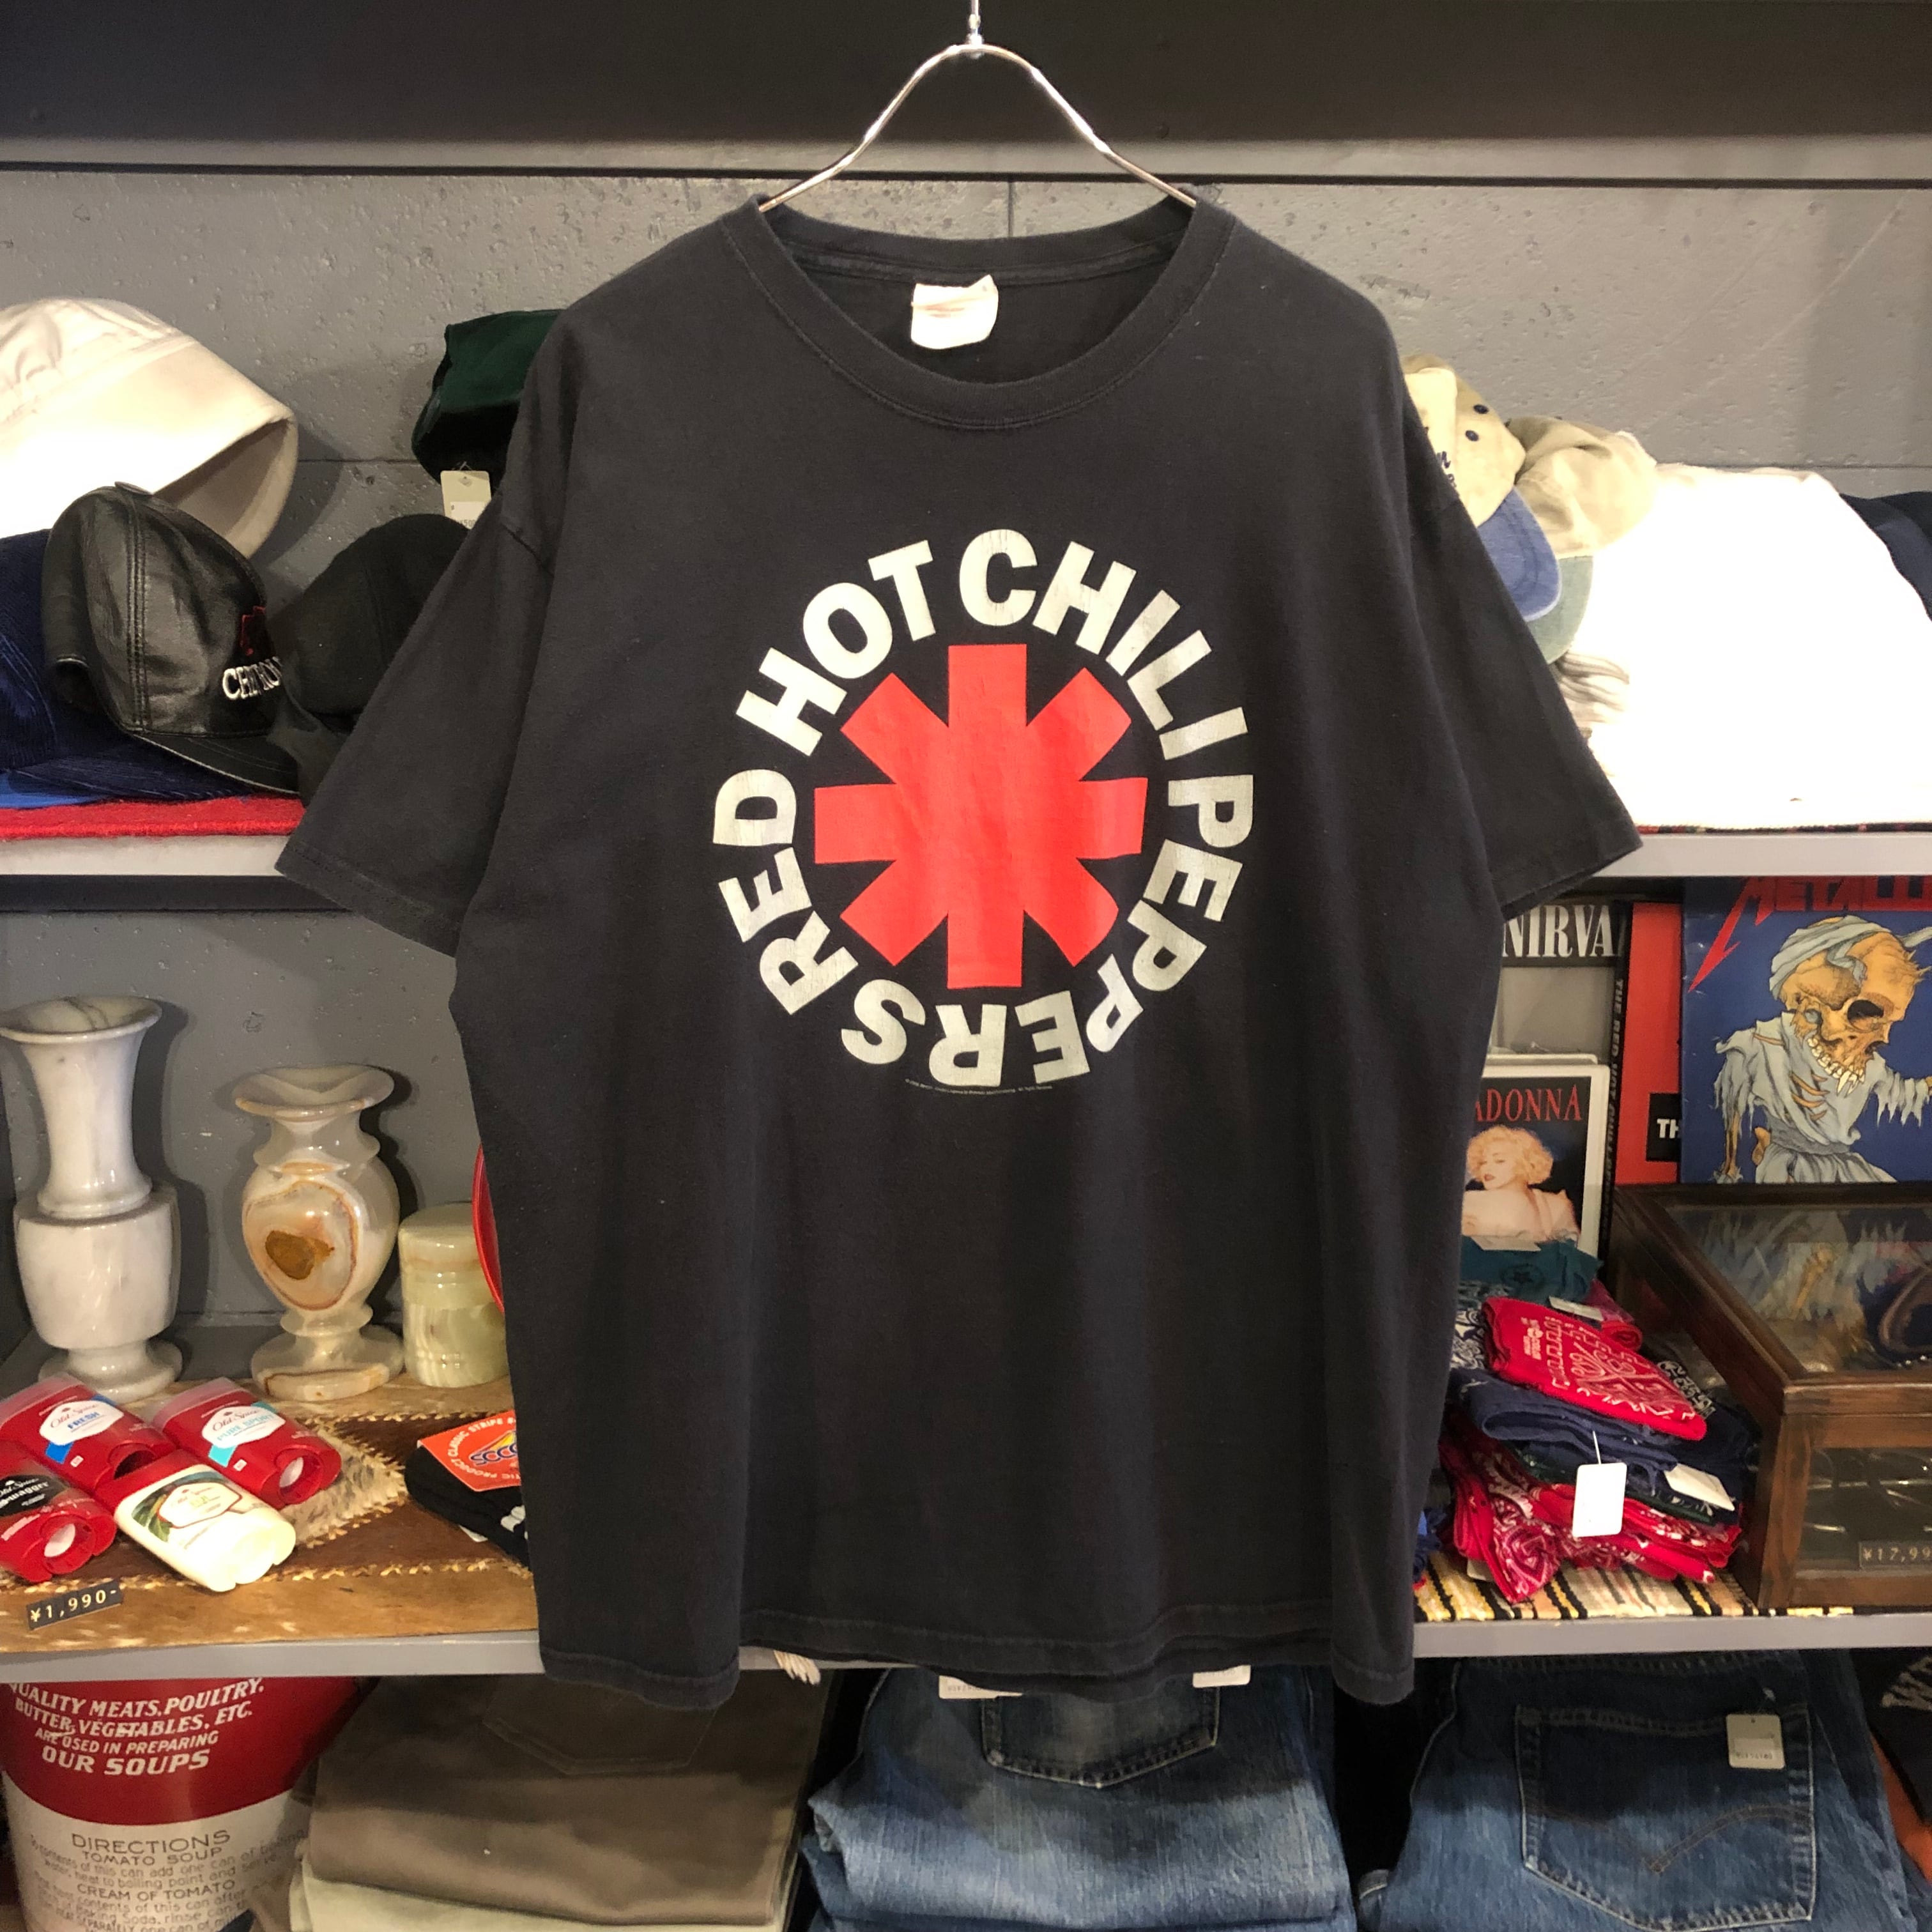 Red Hot Chili Peppers レッチリ 00s Tシャツ